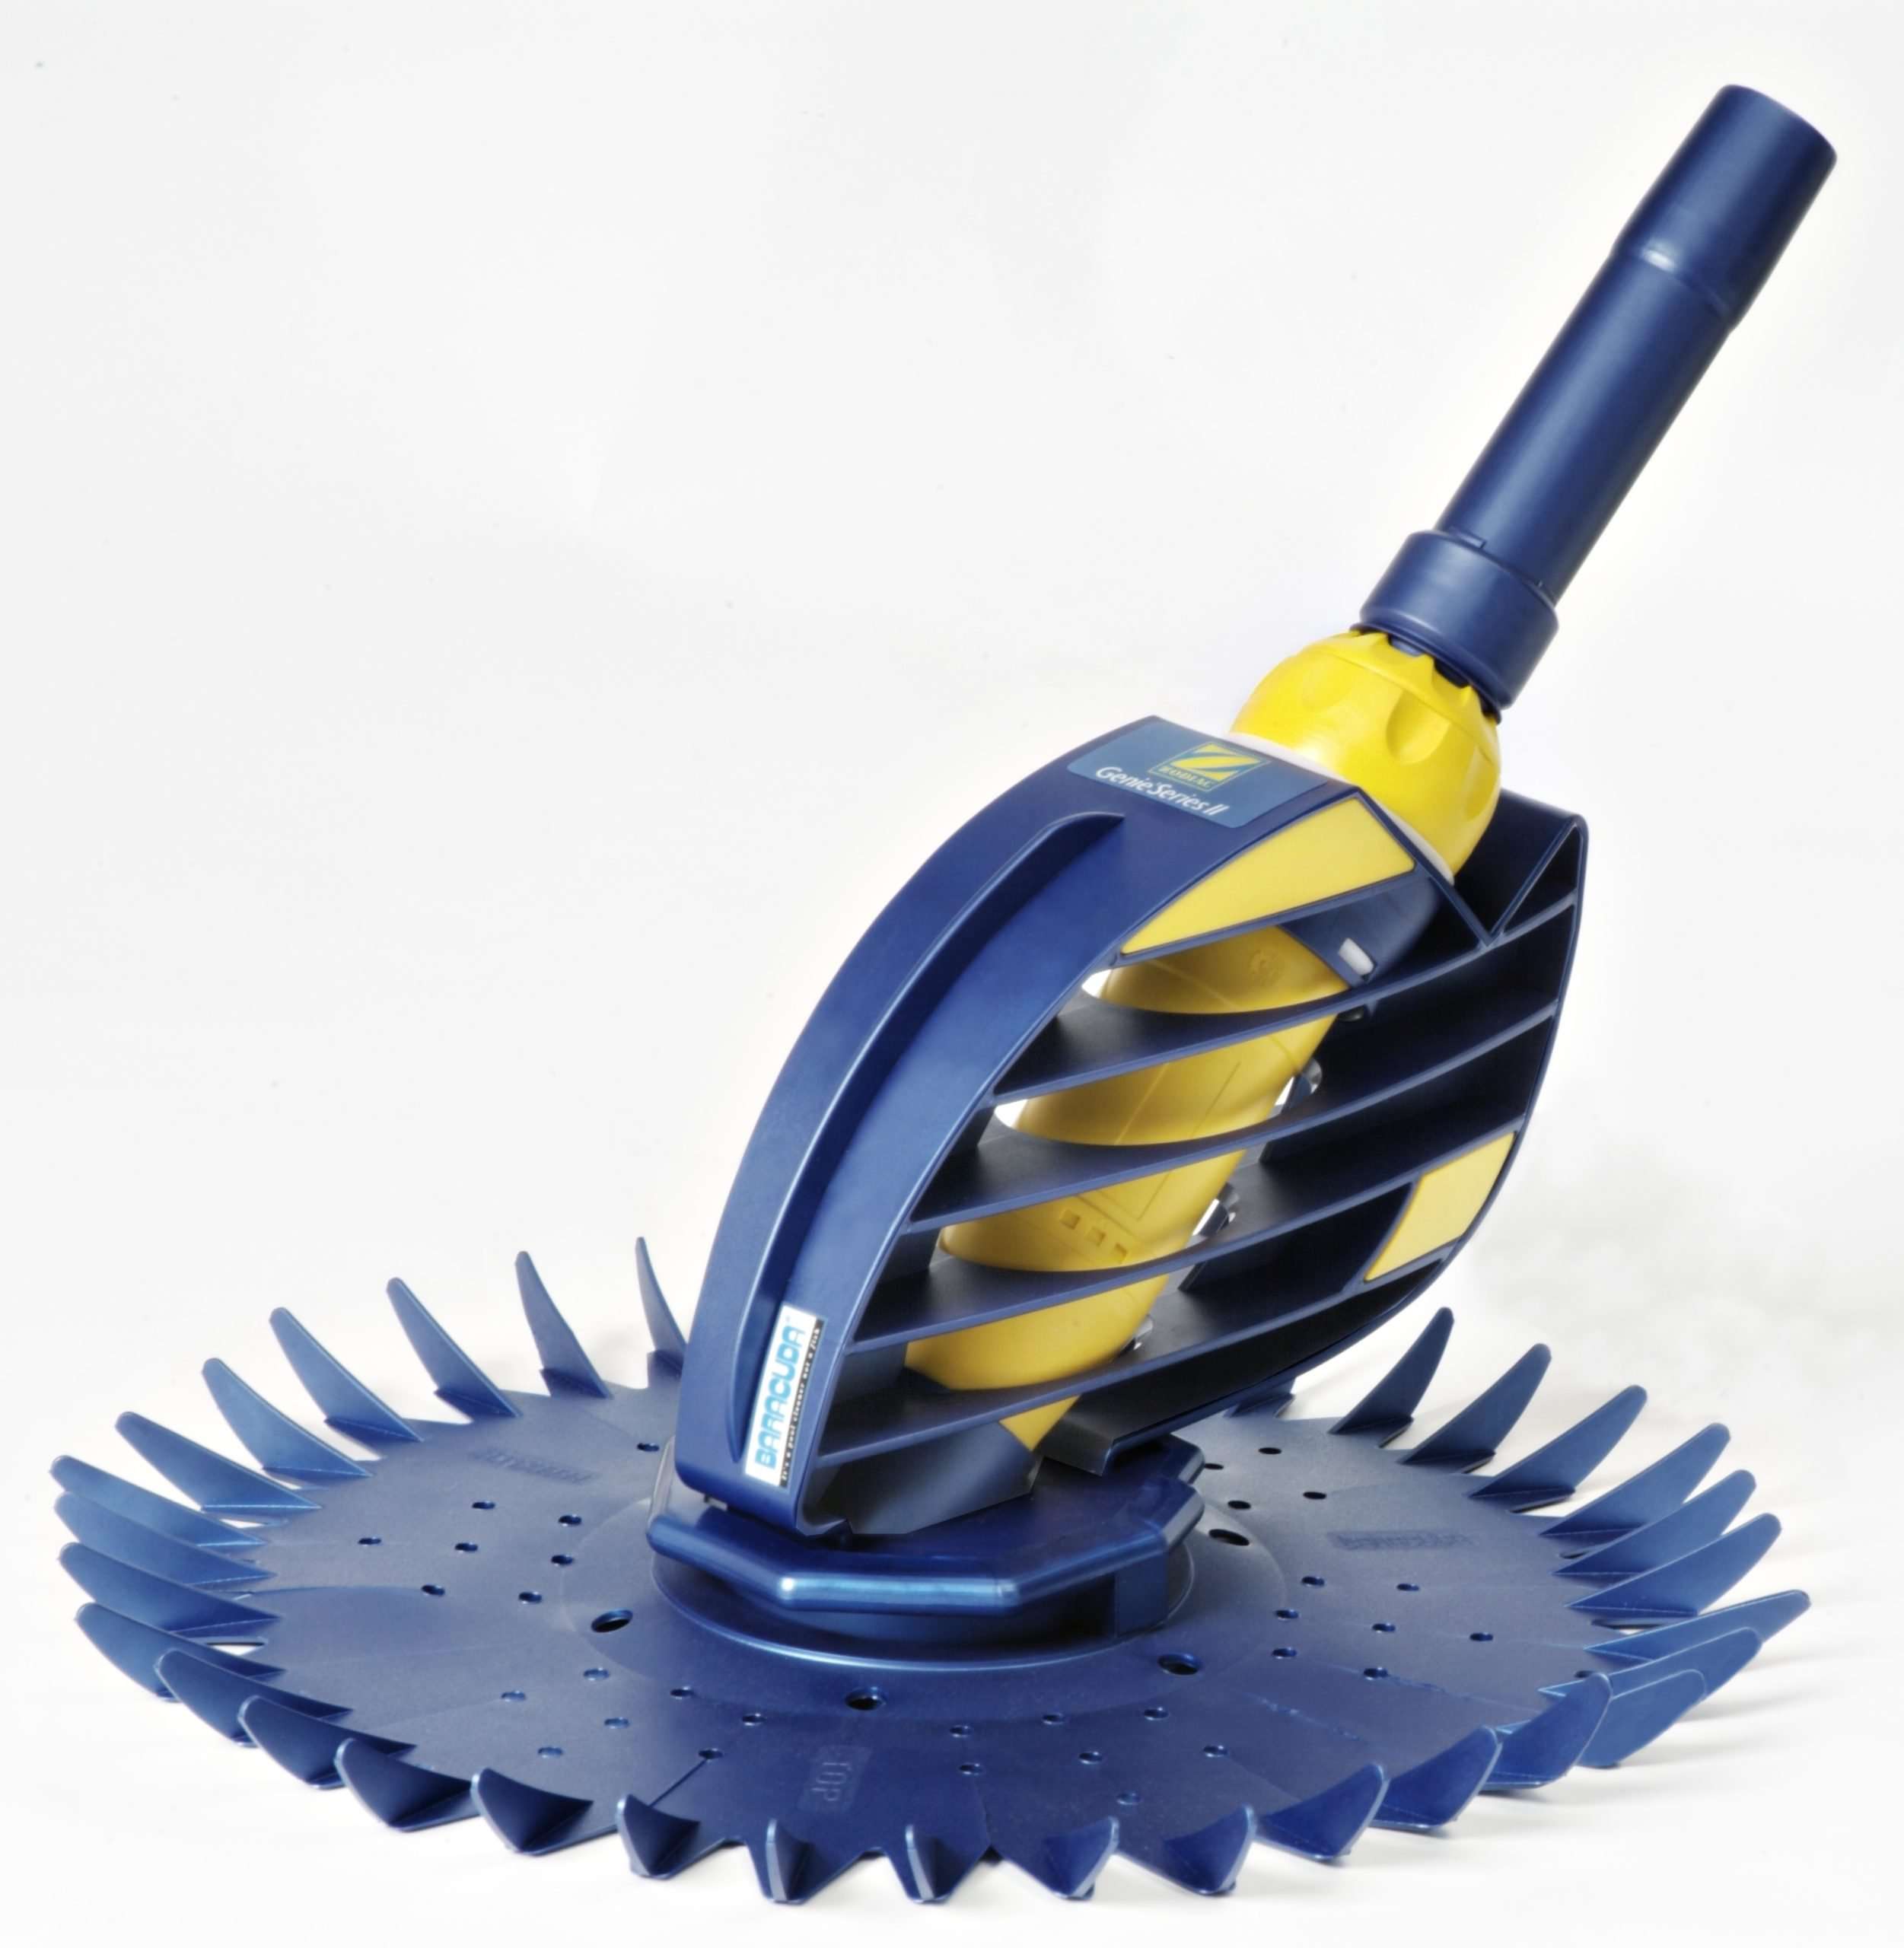 Zodiac G2 Suction Pool Cleaner (previously called Baracuda G2)